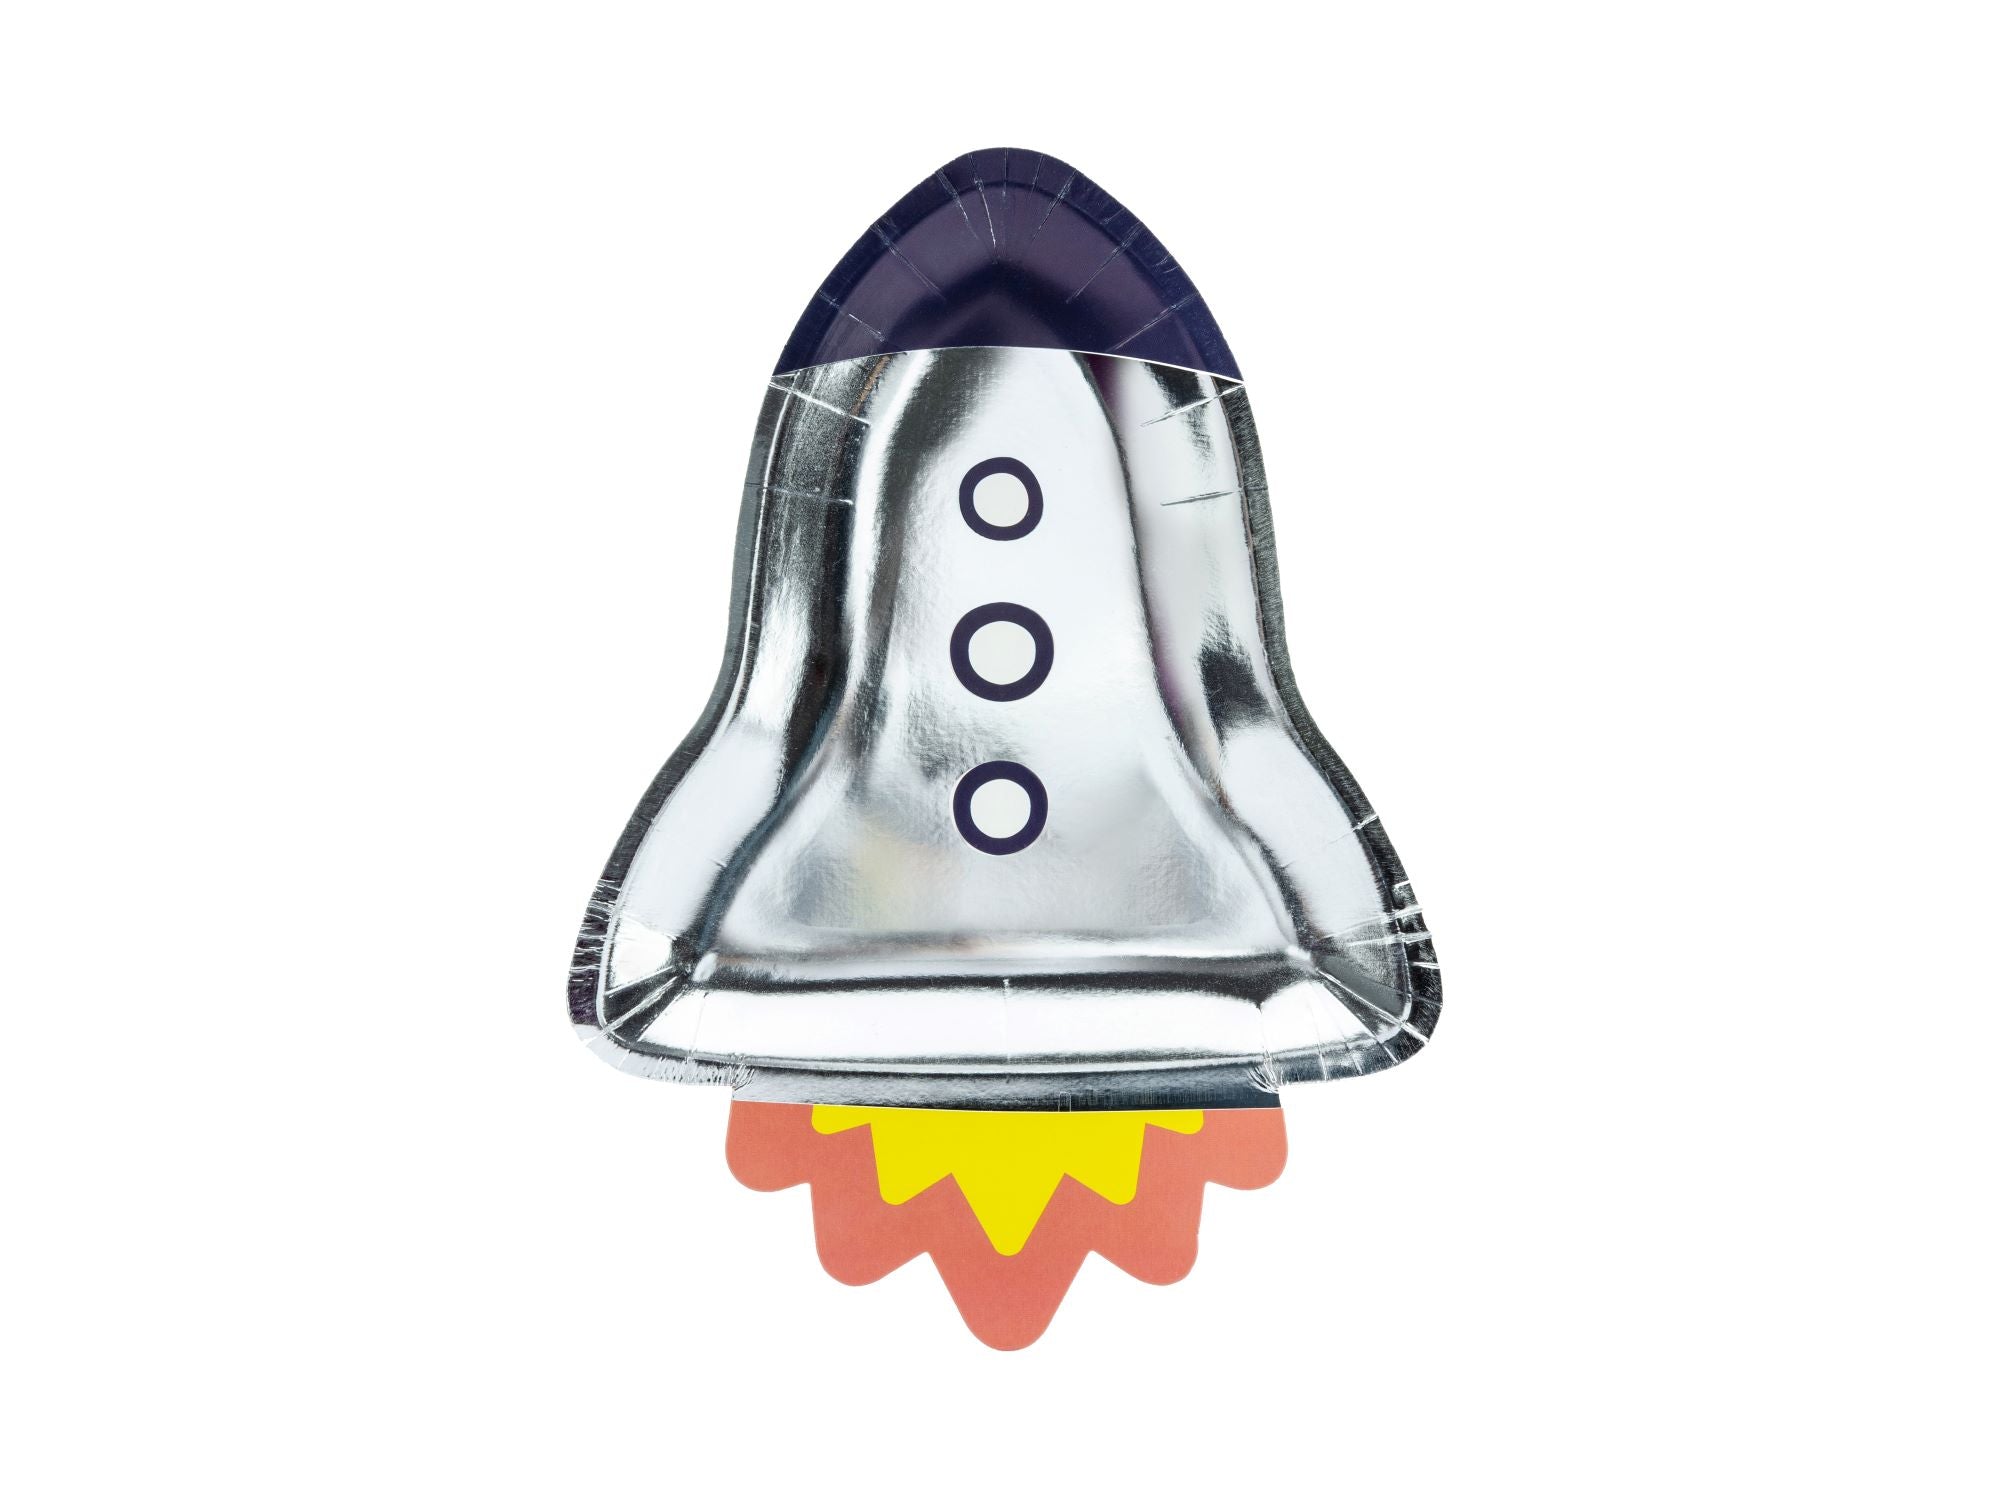 Space Party Rocket Plates Pack of 6